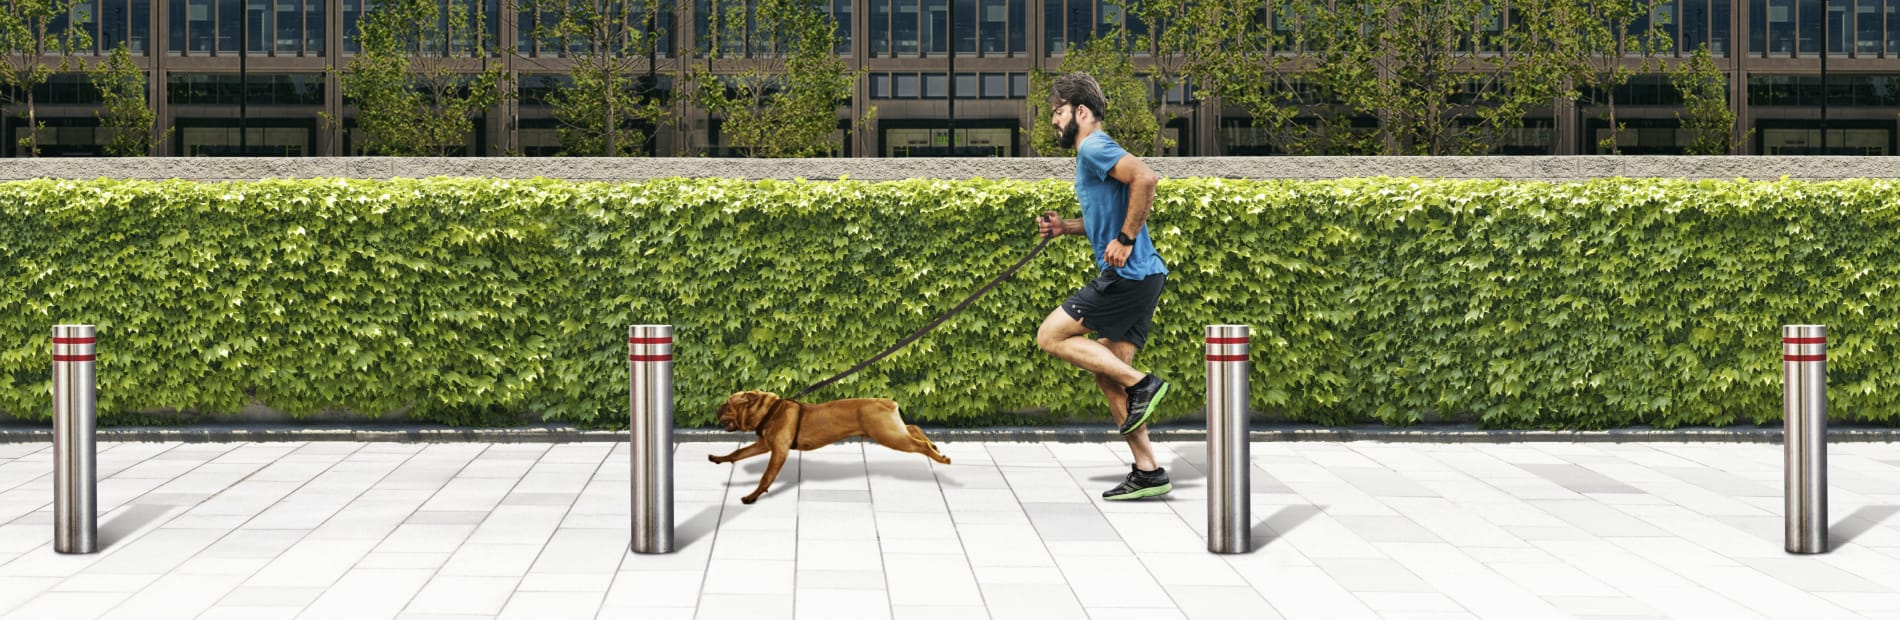 bollards on a pavement with a man running with a dog